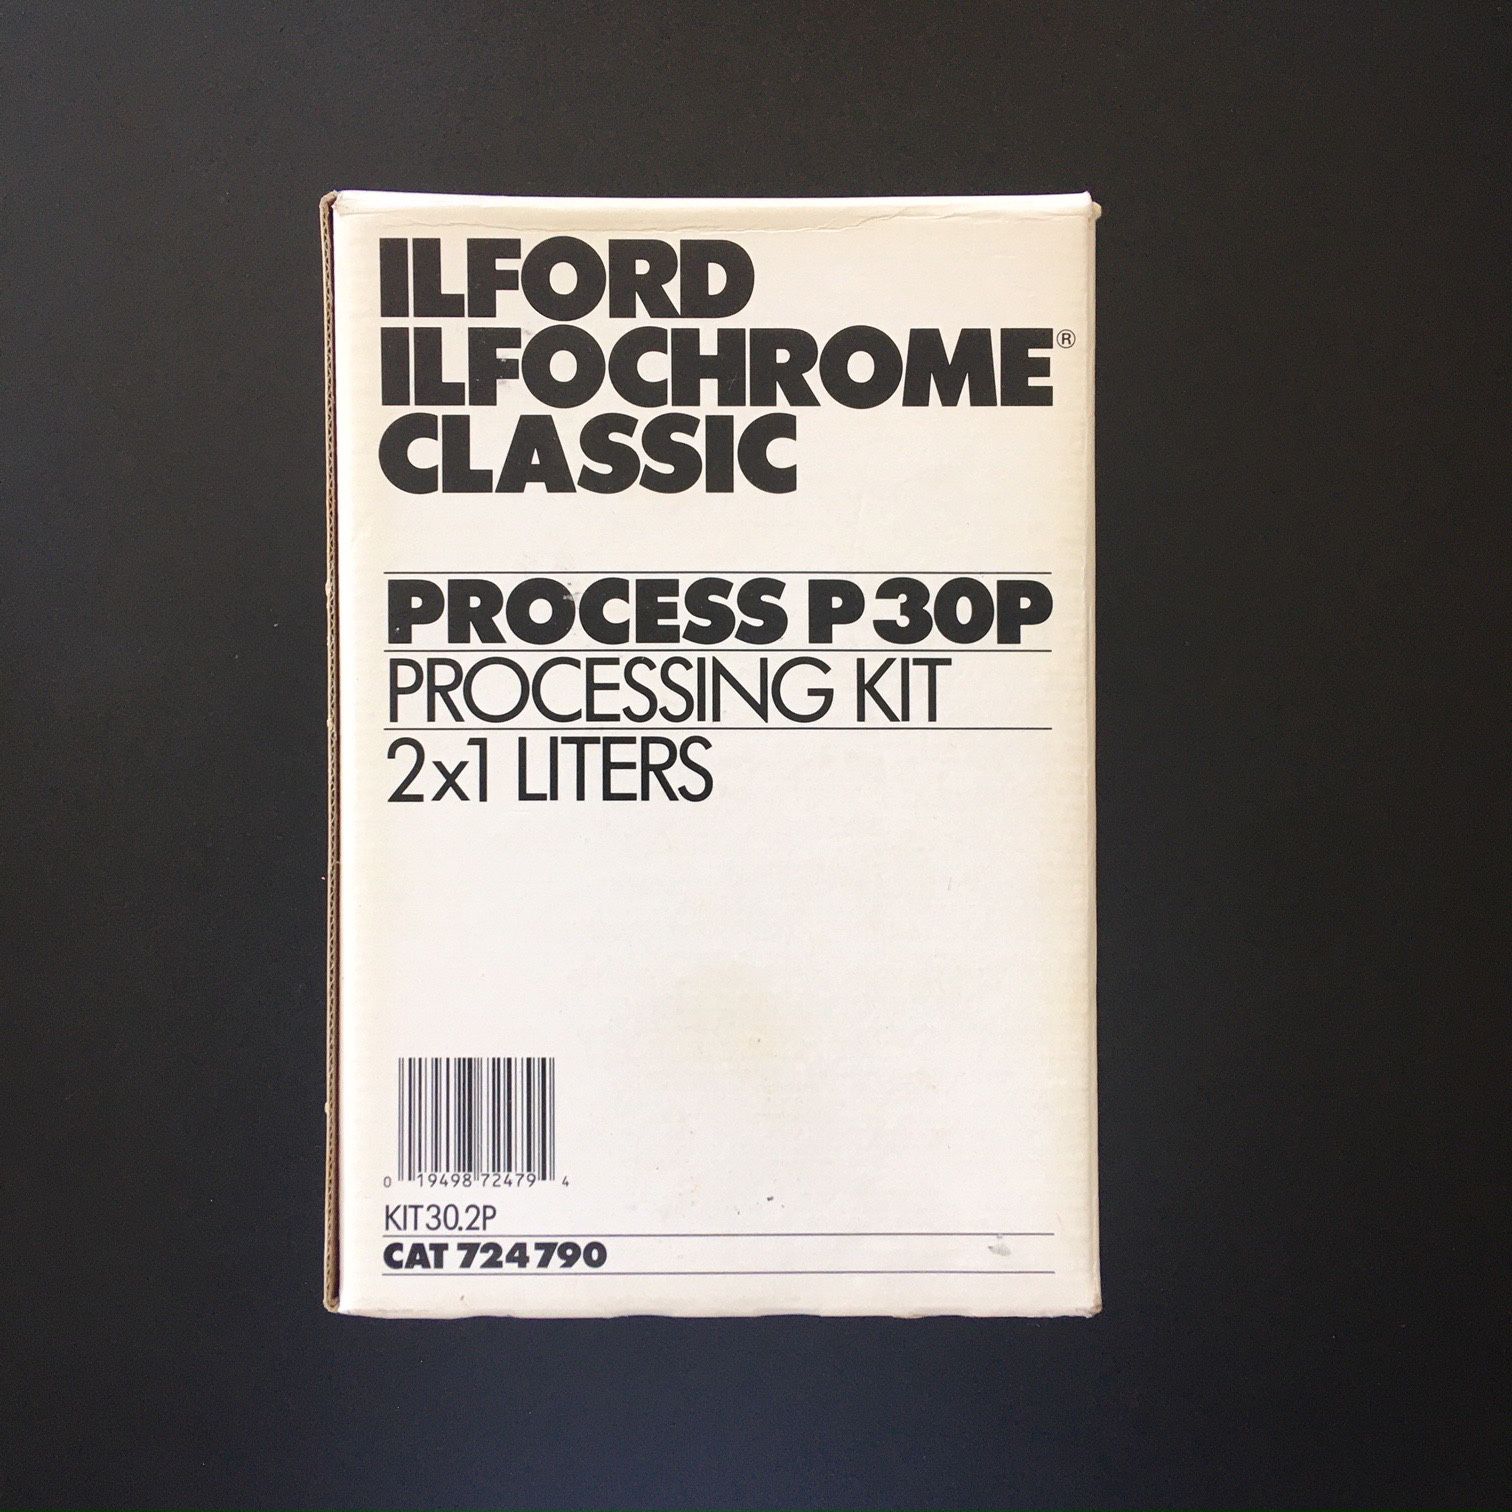 Ilford Ilfochrome P-30P Processing Kit for Photography